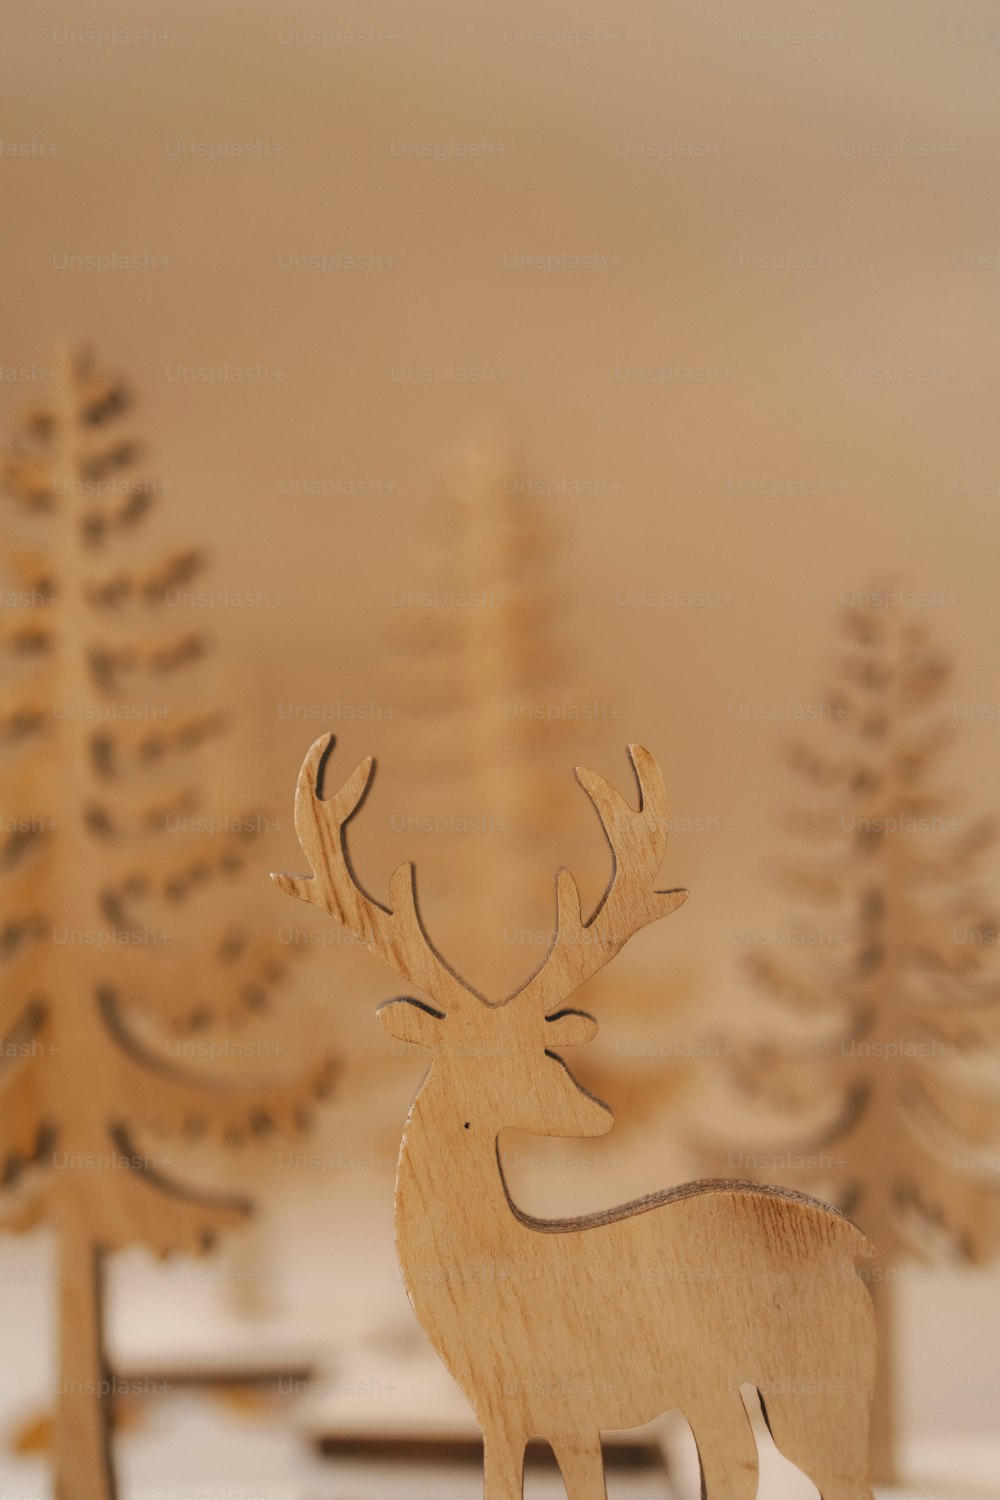 a wooden deer standing in front of some trees